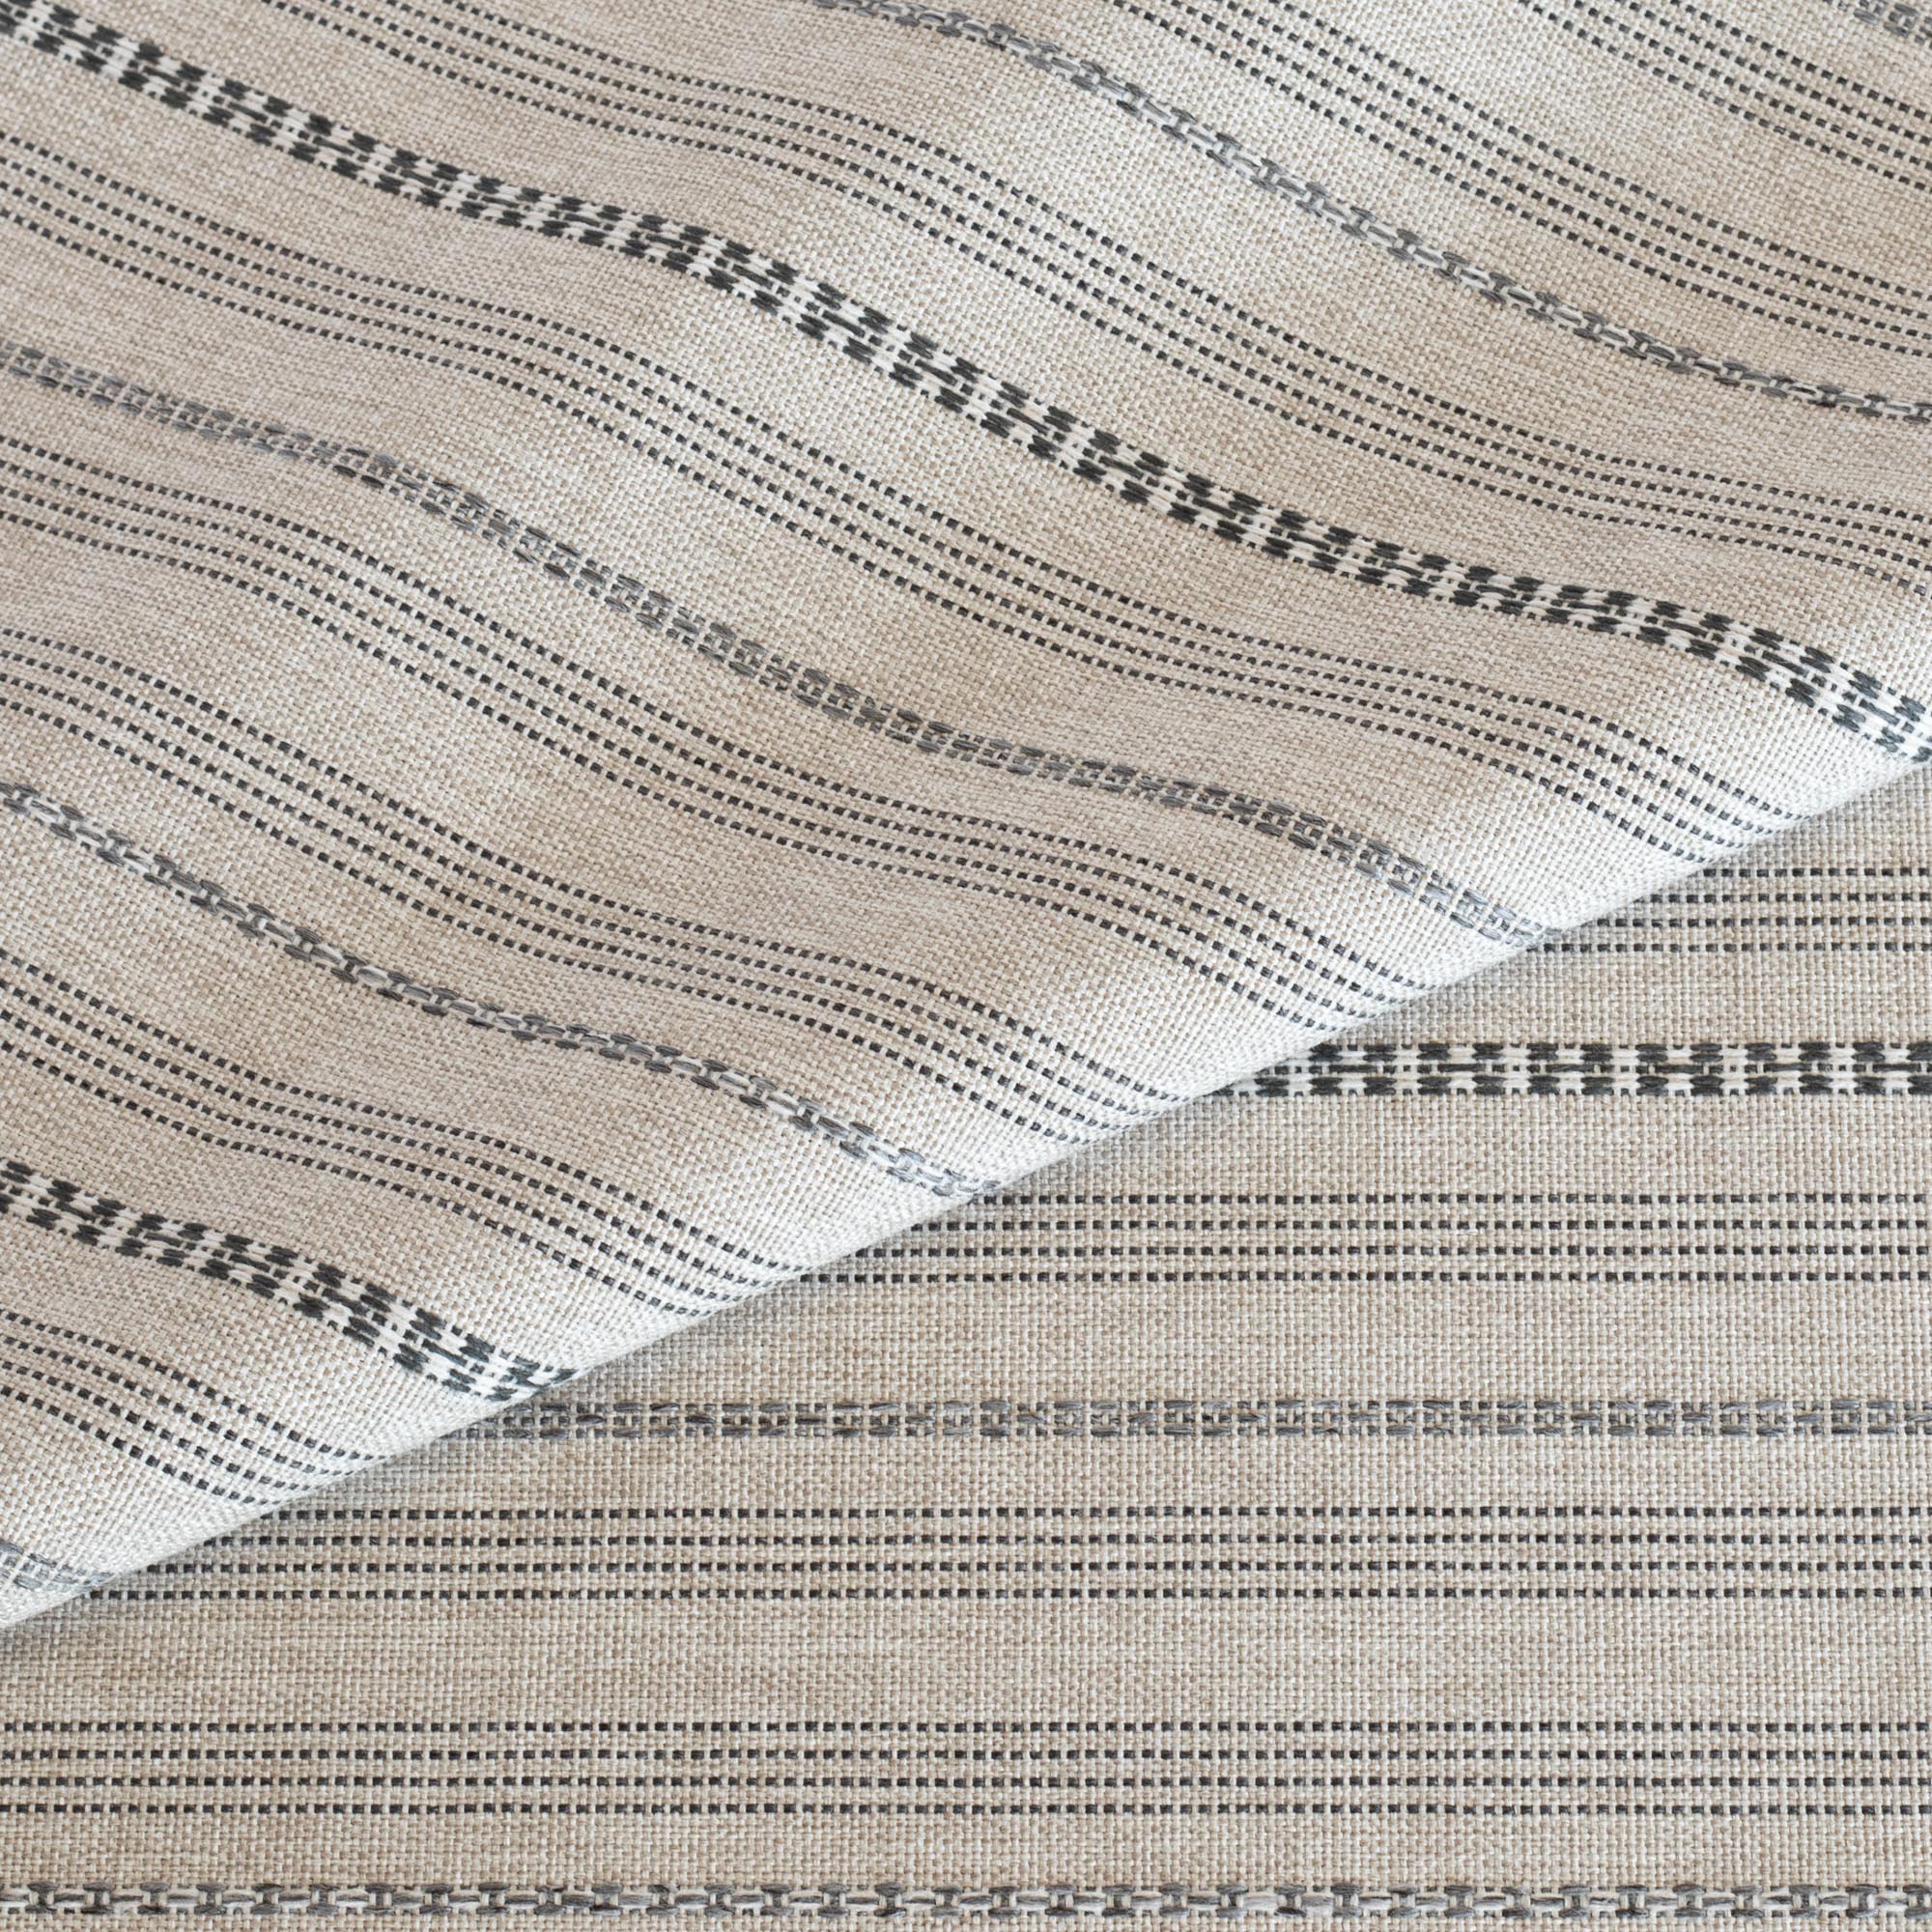 Anya stripe oatmeal cream and gray striped performance upholstery fabric : view 5